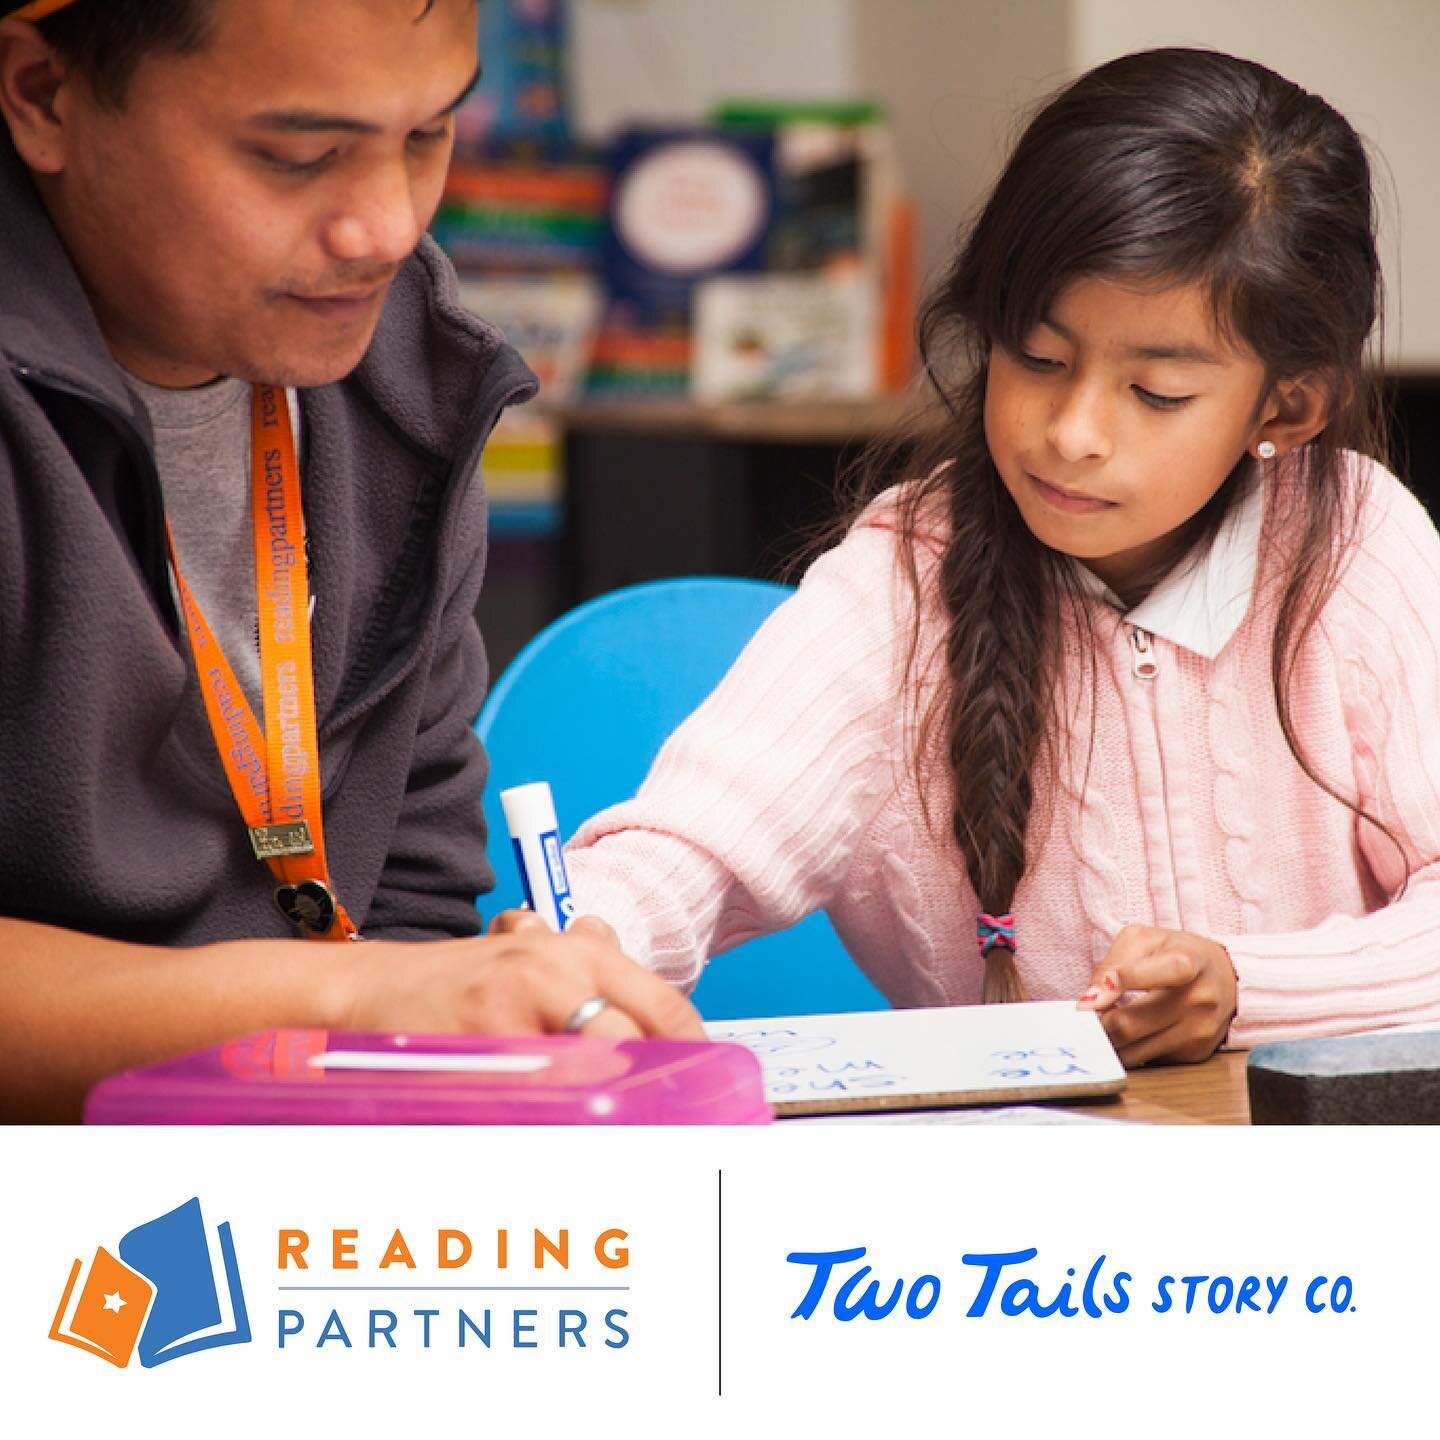 We're proud to team up with @readingpartnersco ! Reading skills are necessary for kids to reach their full potential, and Reading Partners matches students with volunteer tutors to help them learn to read. Their mission is to &quot;help children beco